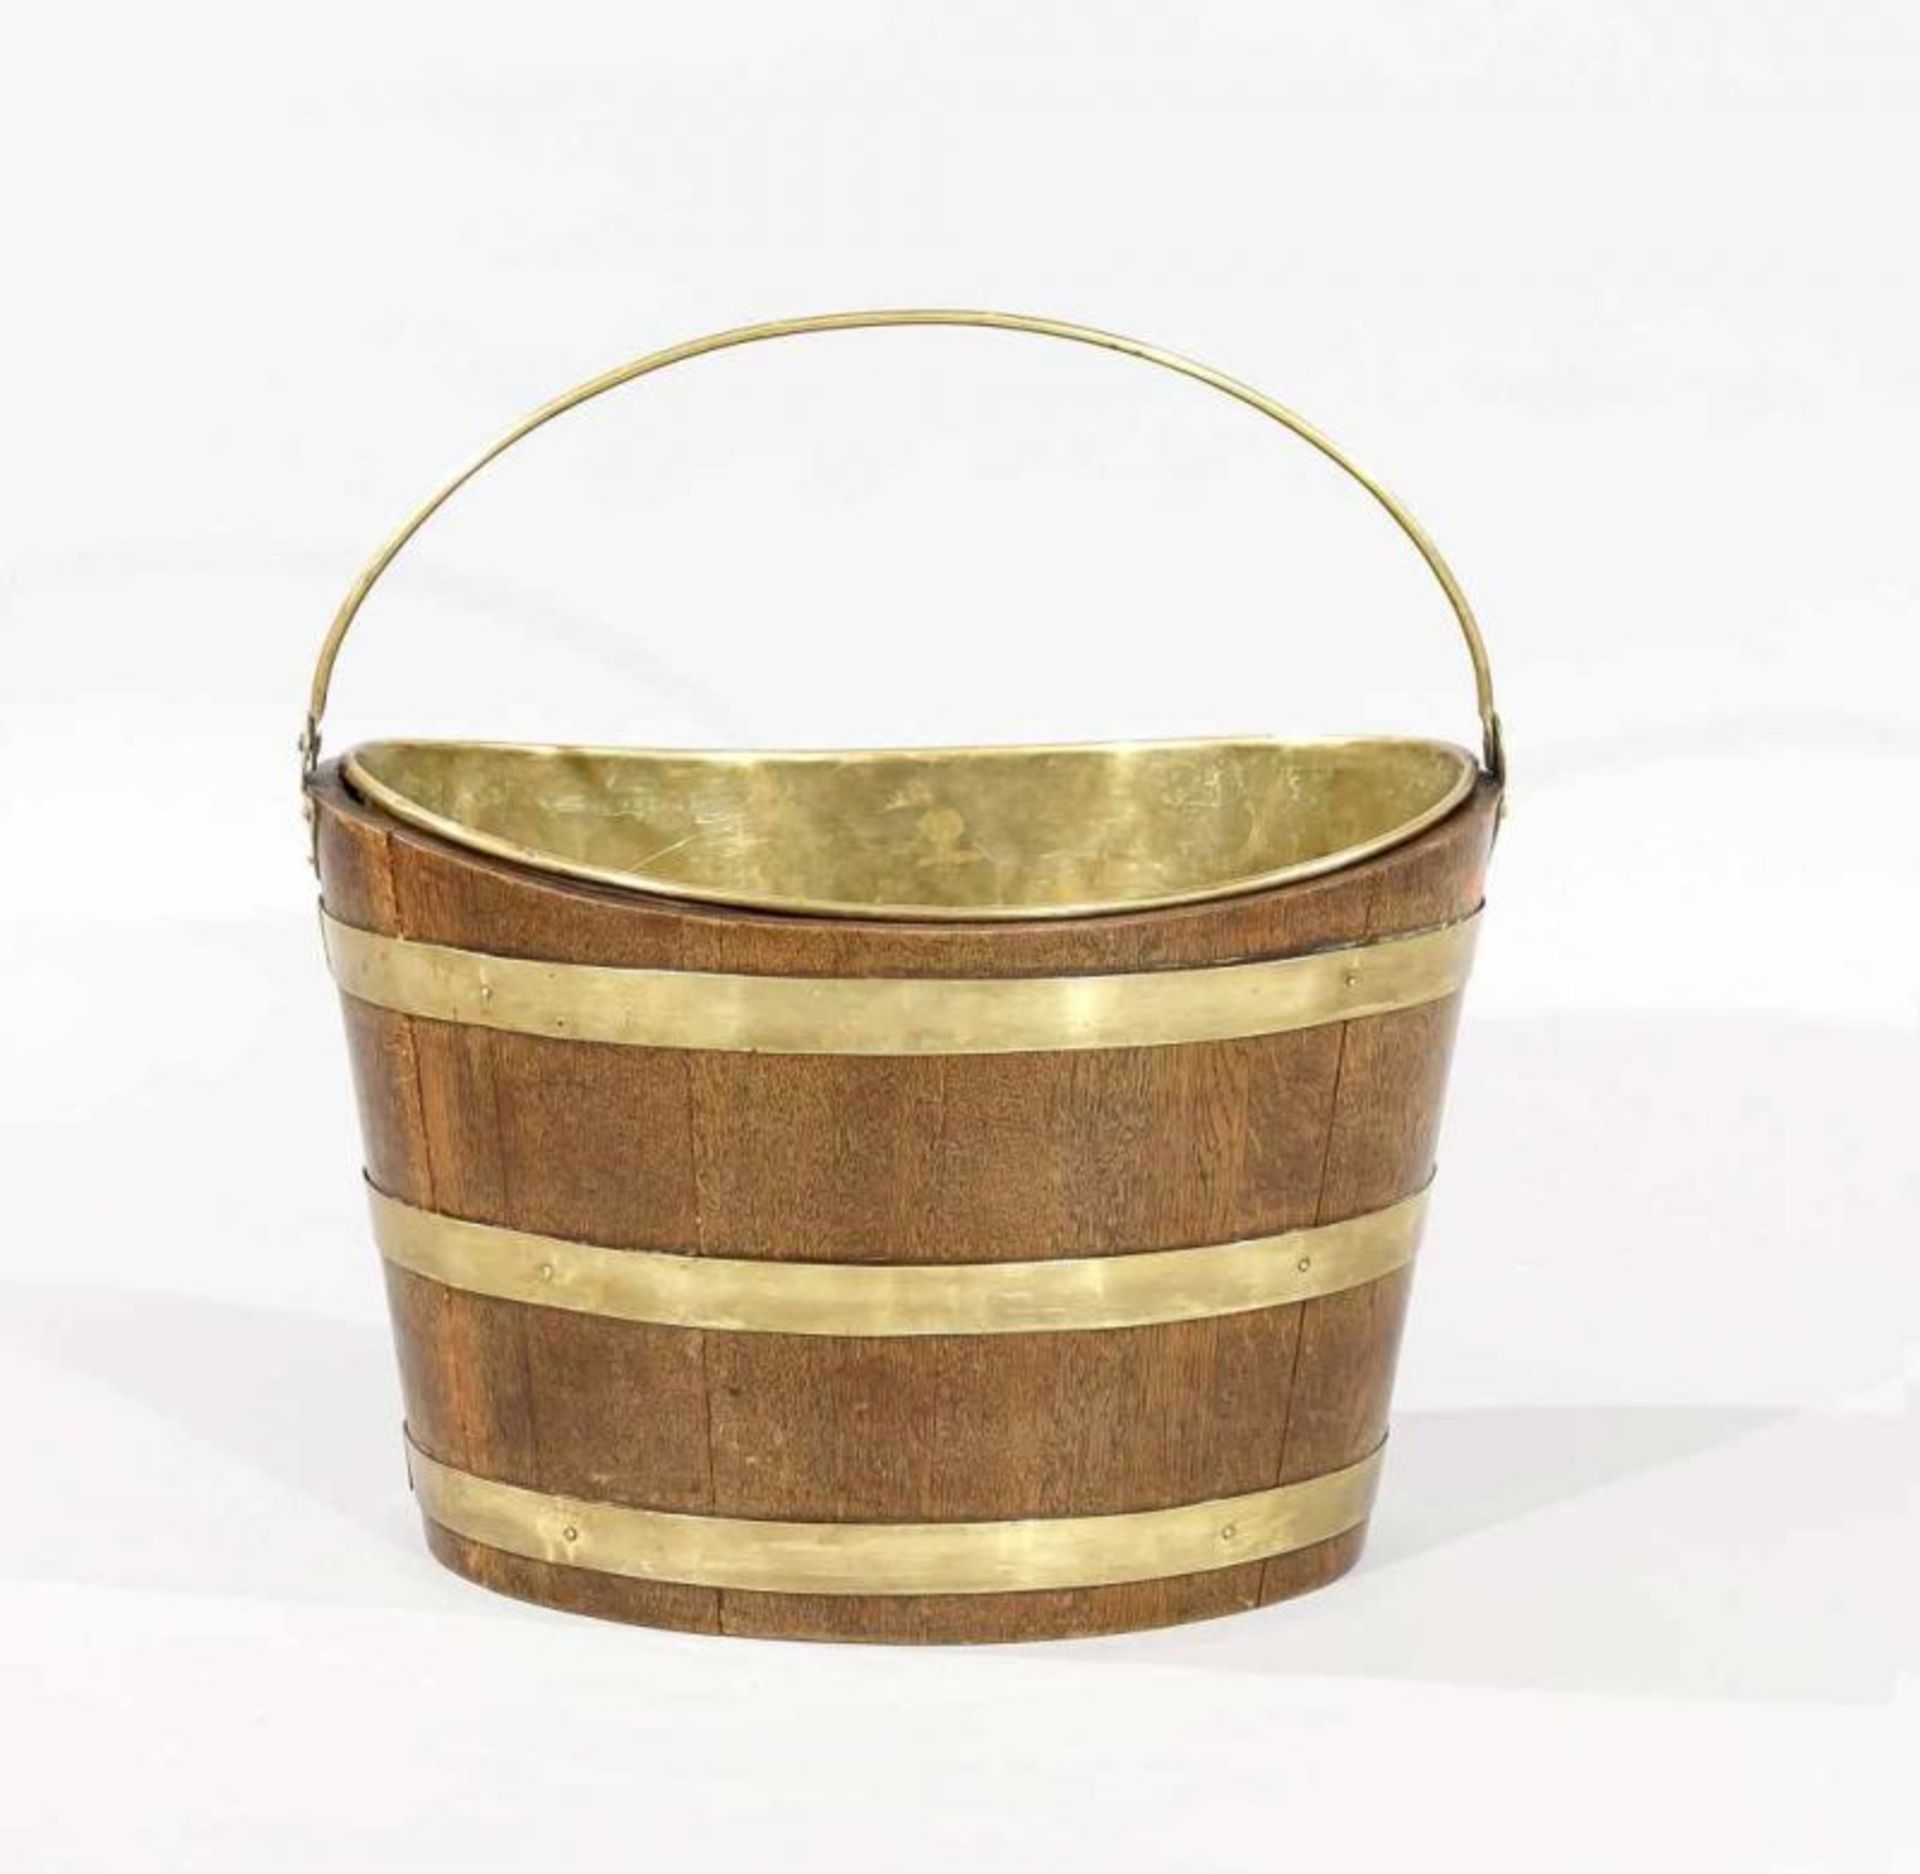 Large antique oval oak bucket with brass handle and inner container. Around 1800. Dimensions: 27 x